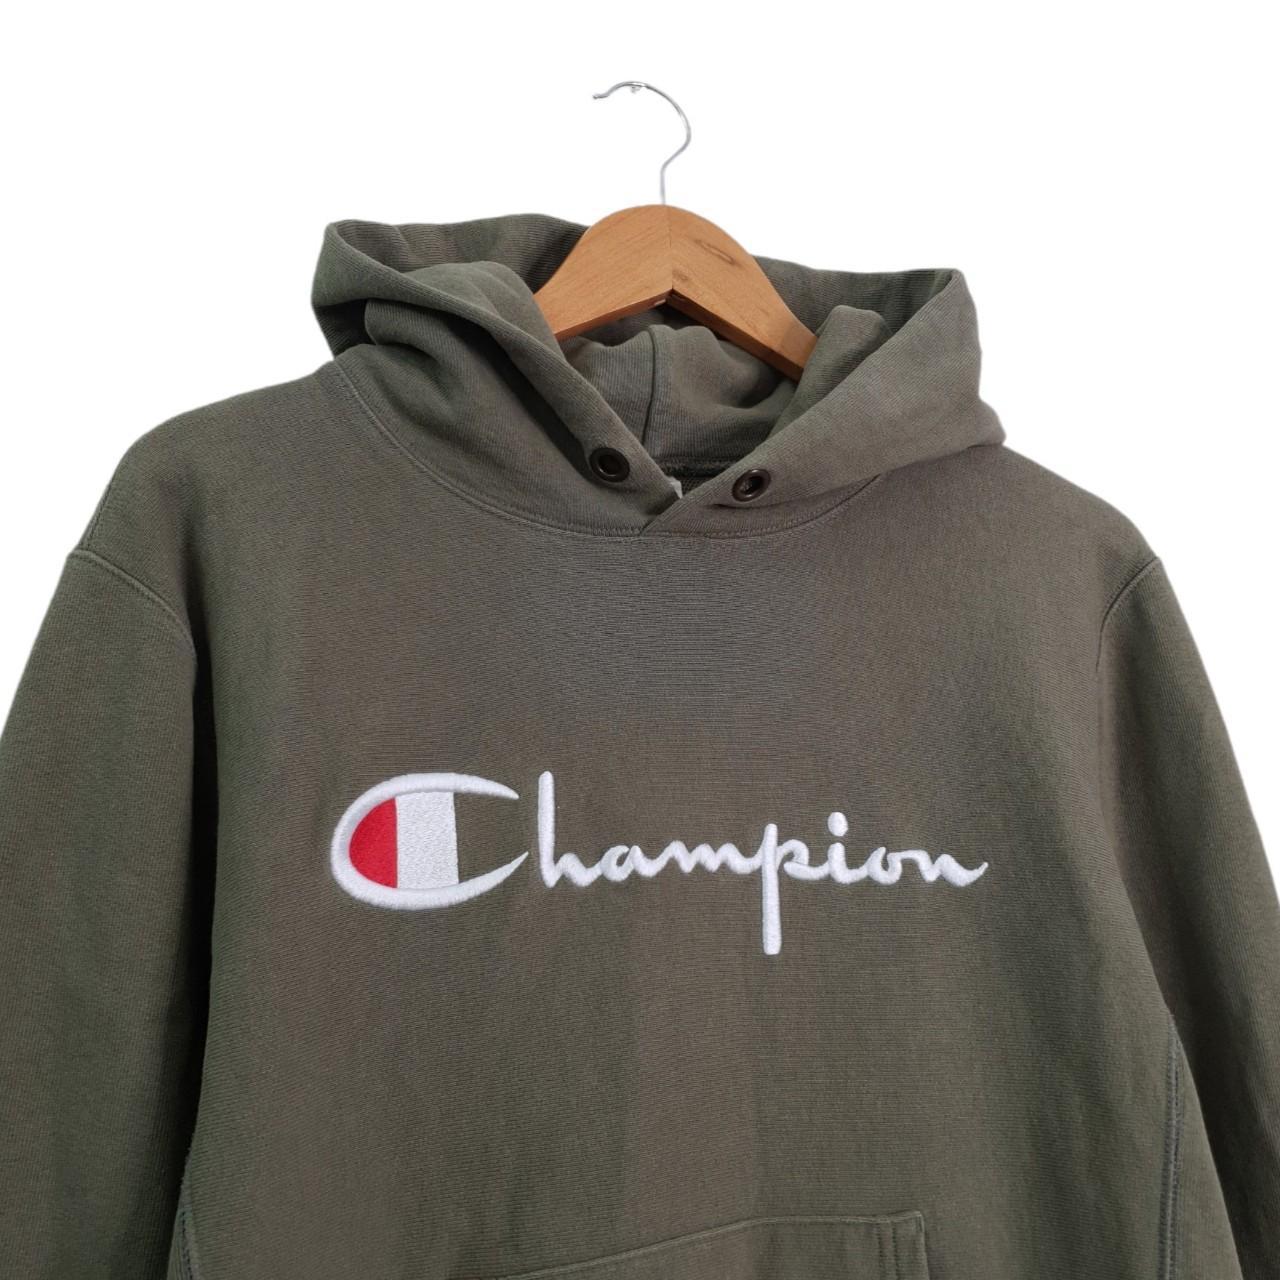 Vintage Champion reverse weave hoodie fits as a size... - Depop